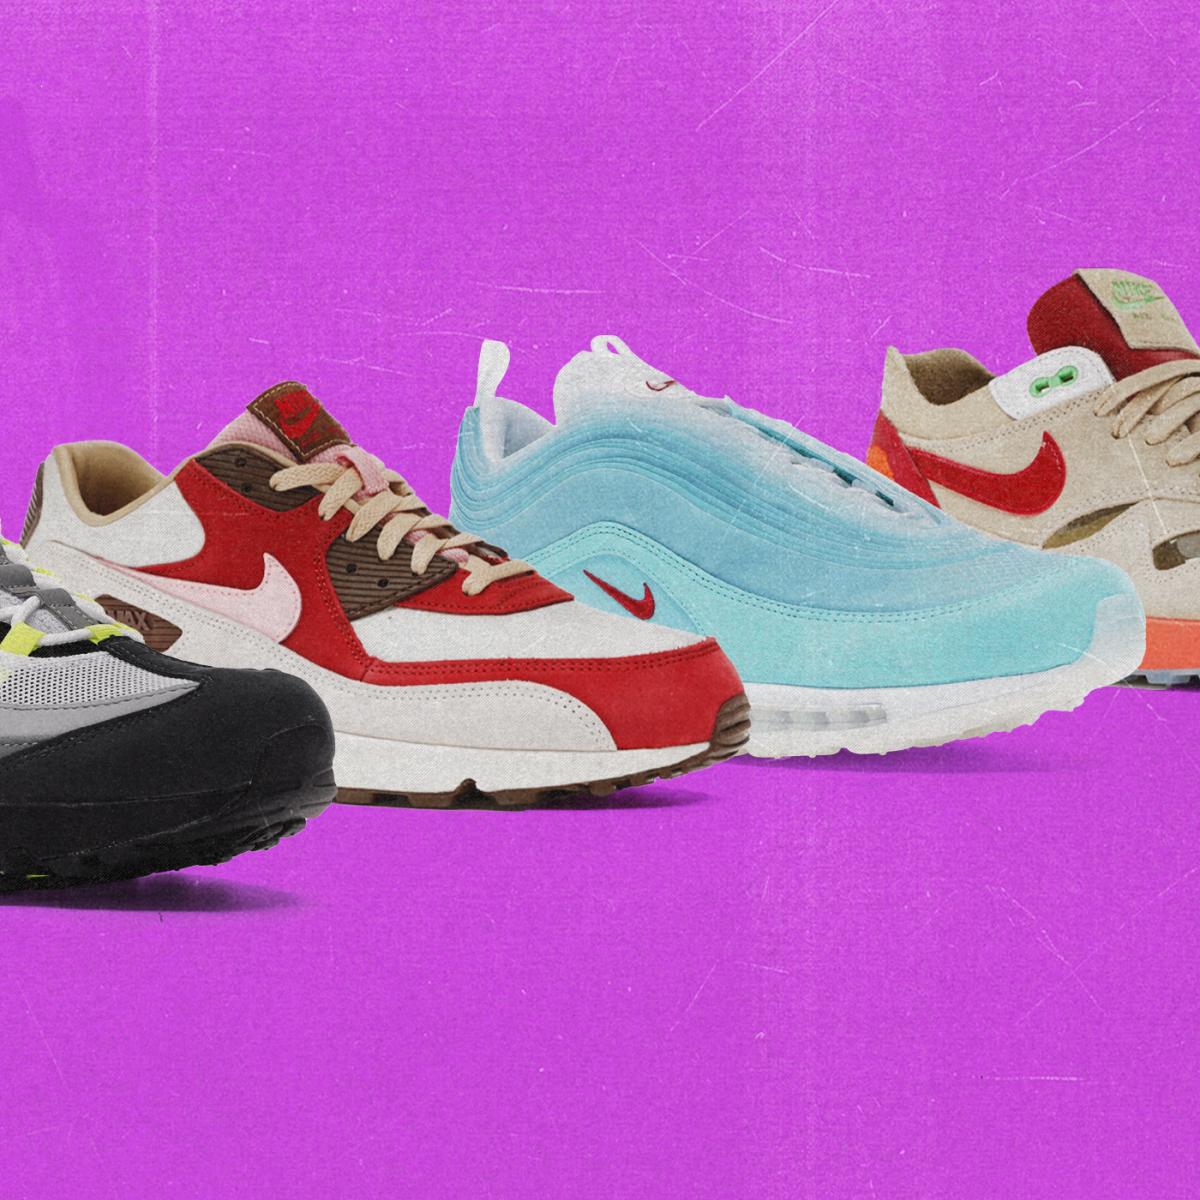 Supreme x Nike Collaborations: 17 Years and Counting - StockX News